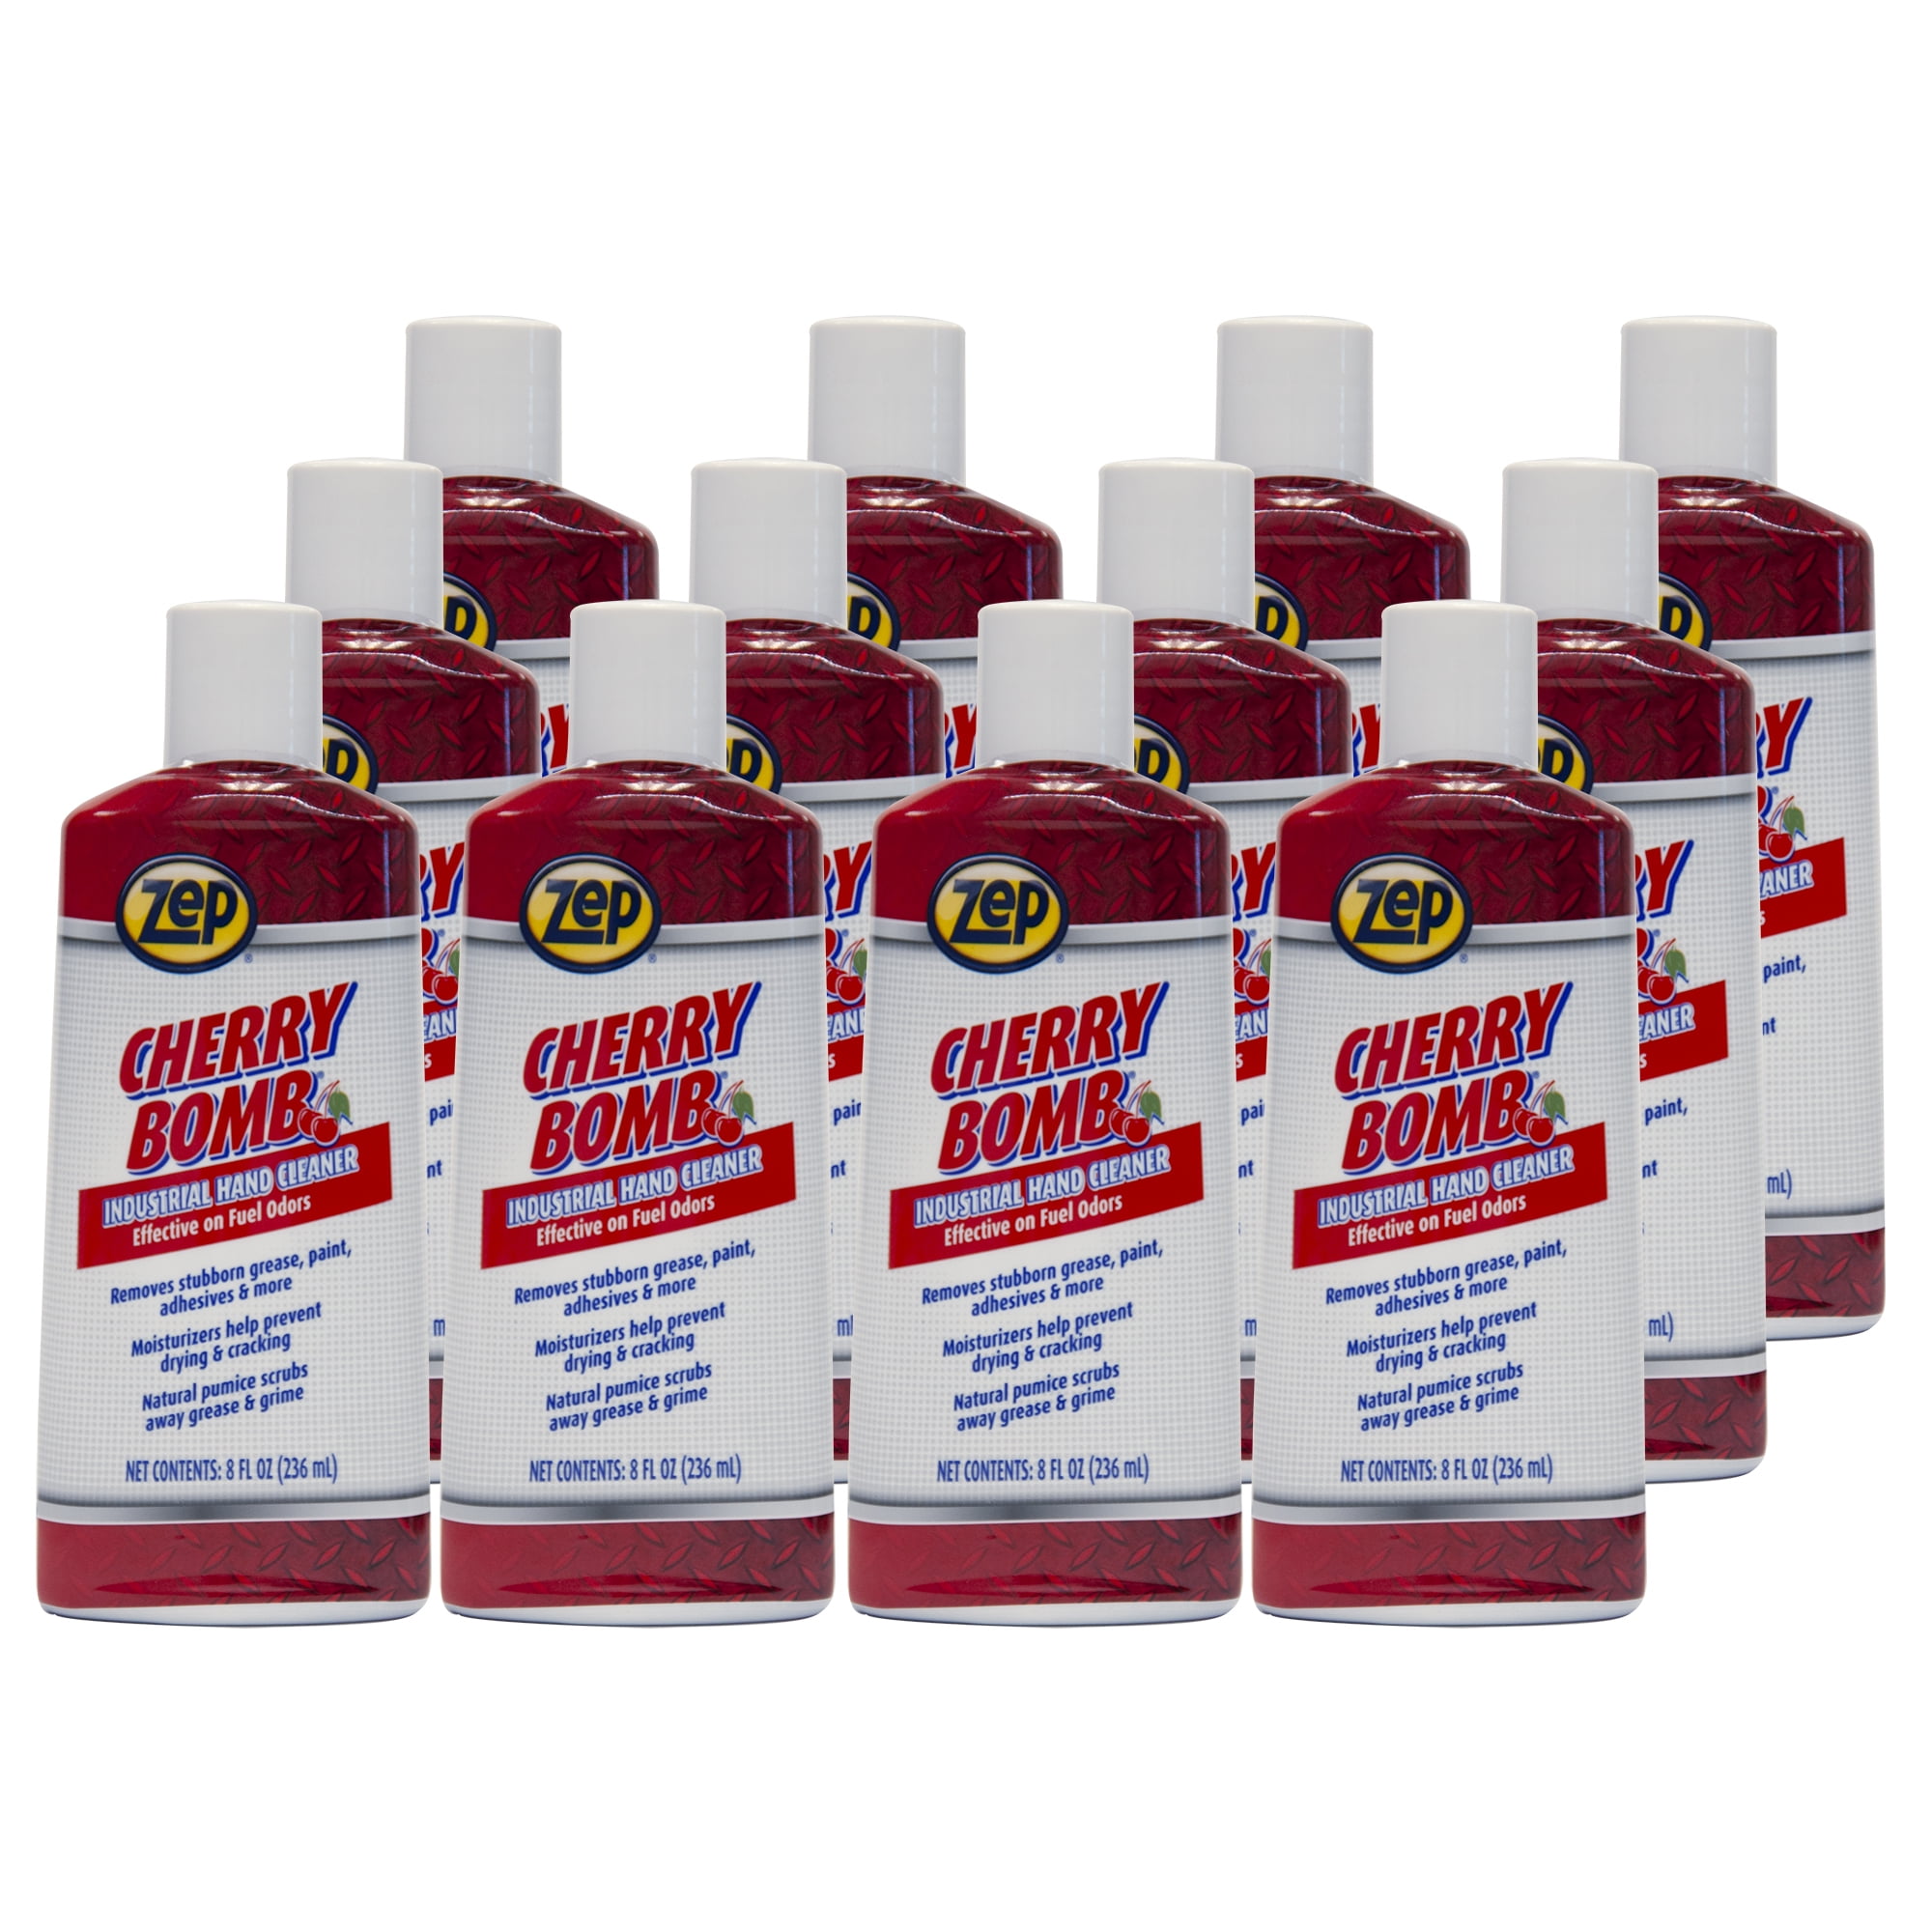  Zep Cherry Bomb Hand Cleaner 1 Gal - Refill Only